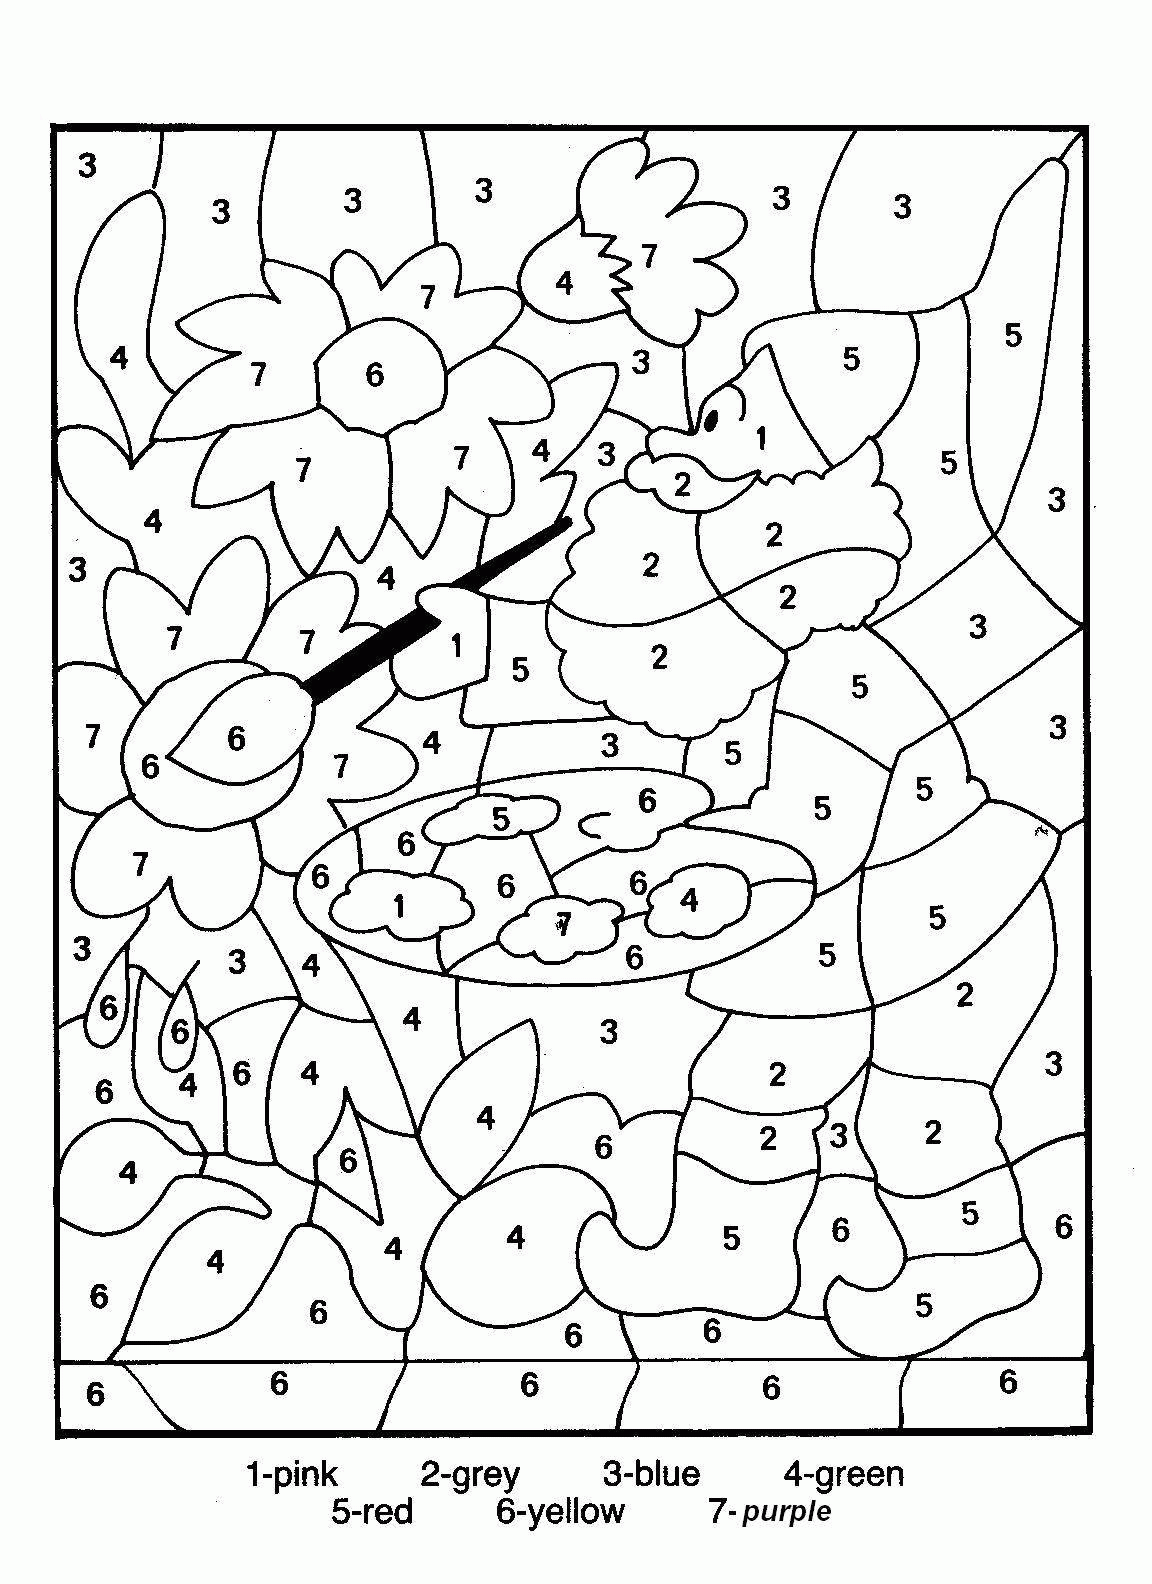 colouring-page-advanced-color-by-number-printables-our-free-printables-are-strictly-for